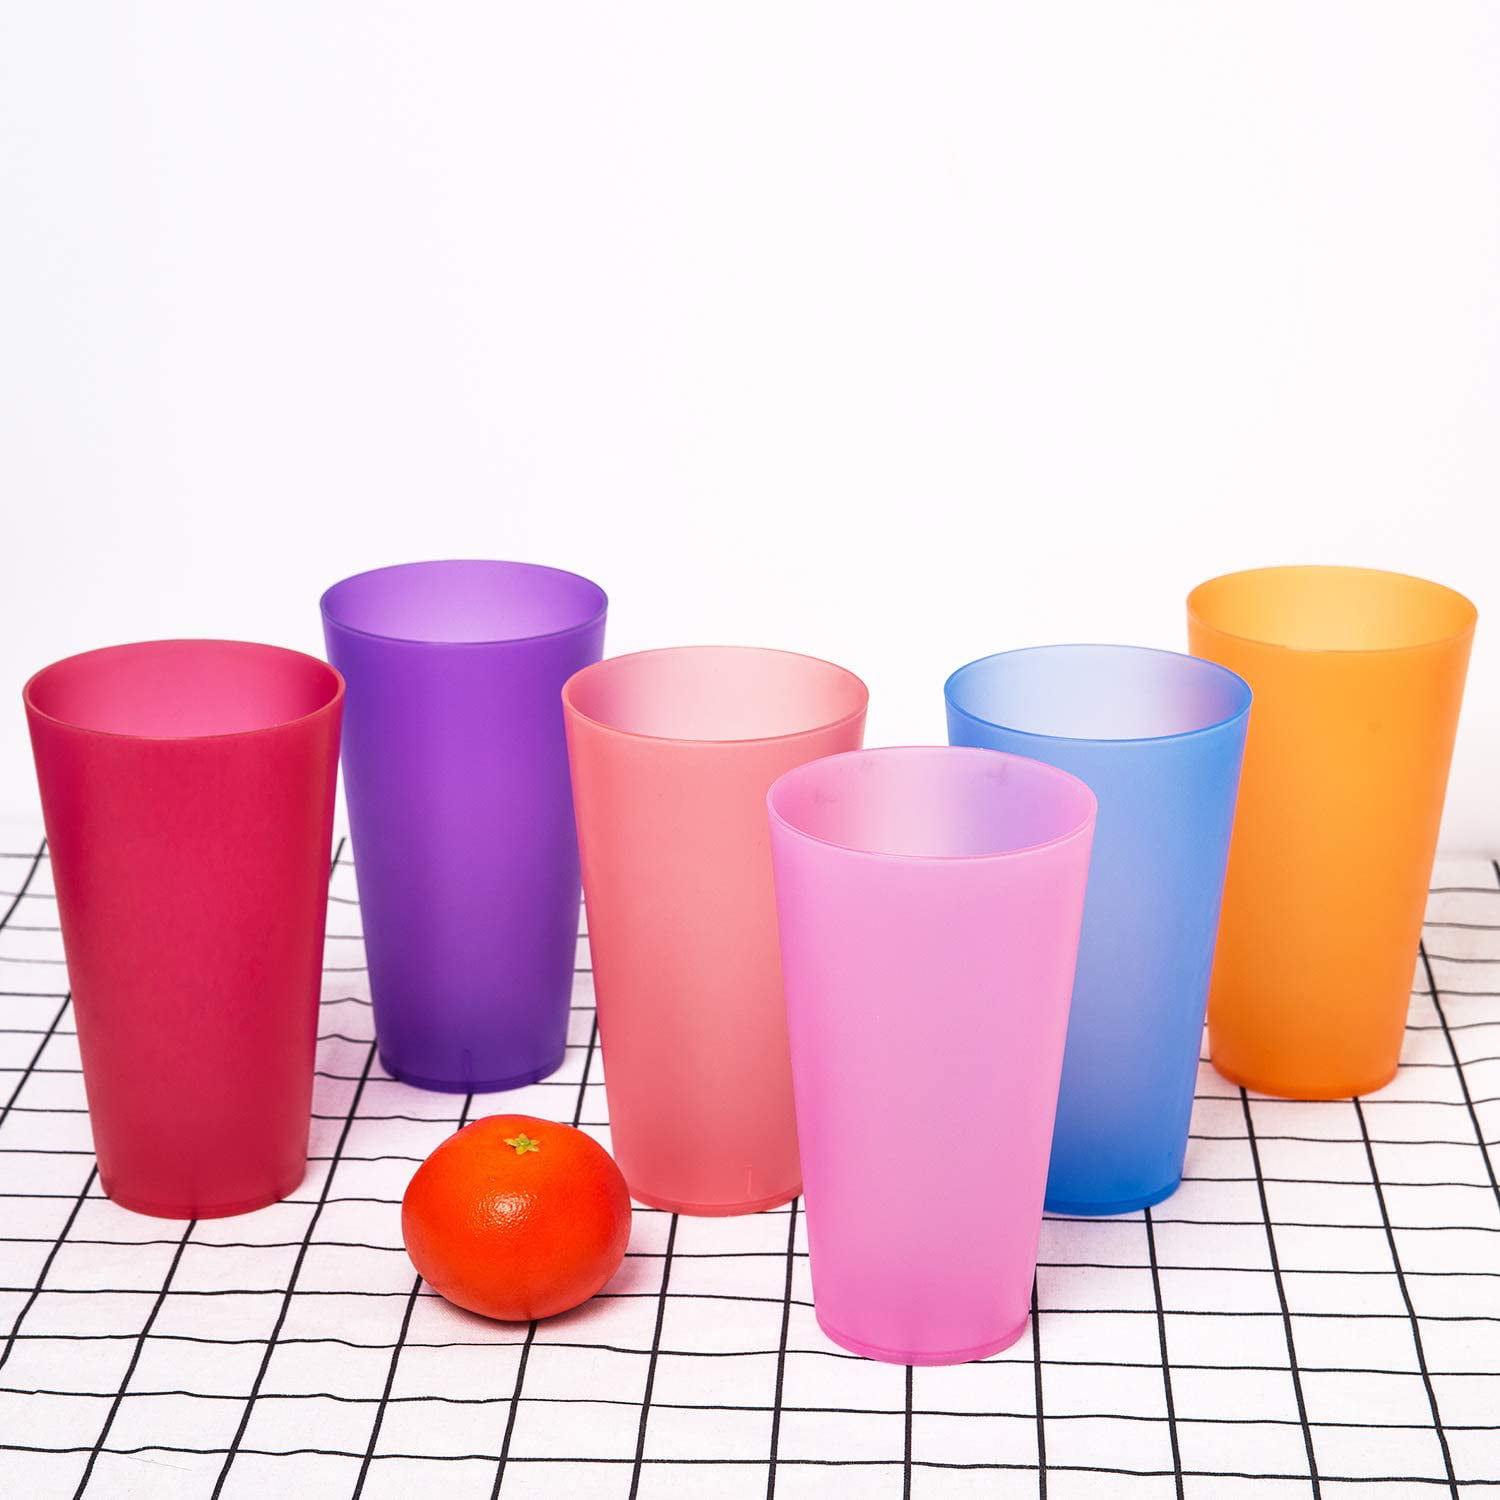 WEXINHAO 32 oz Large Plastic Cups, Durable Plastic Drinking Glasses set of  12, BPA Free Dishwasher S…See more WEXINHAO 32 oz Large Plastic Cups